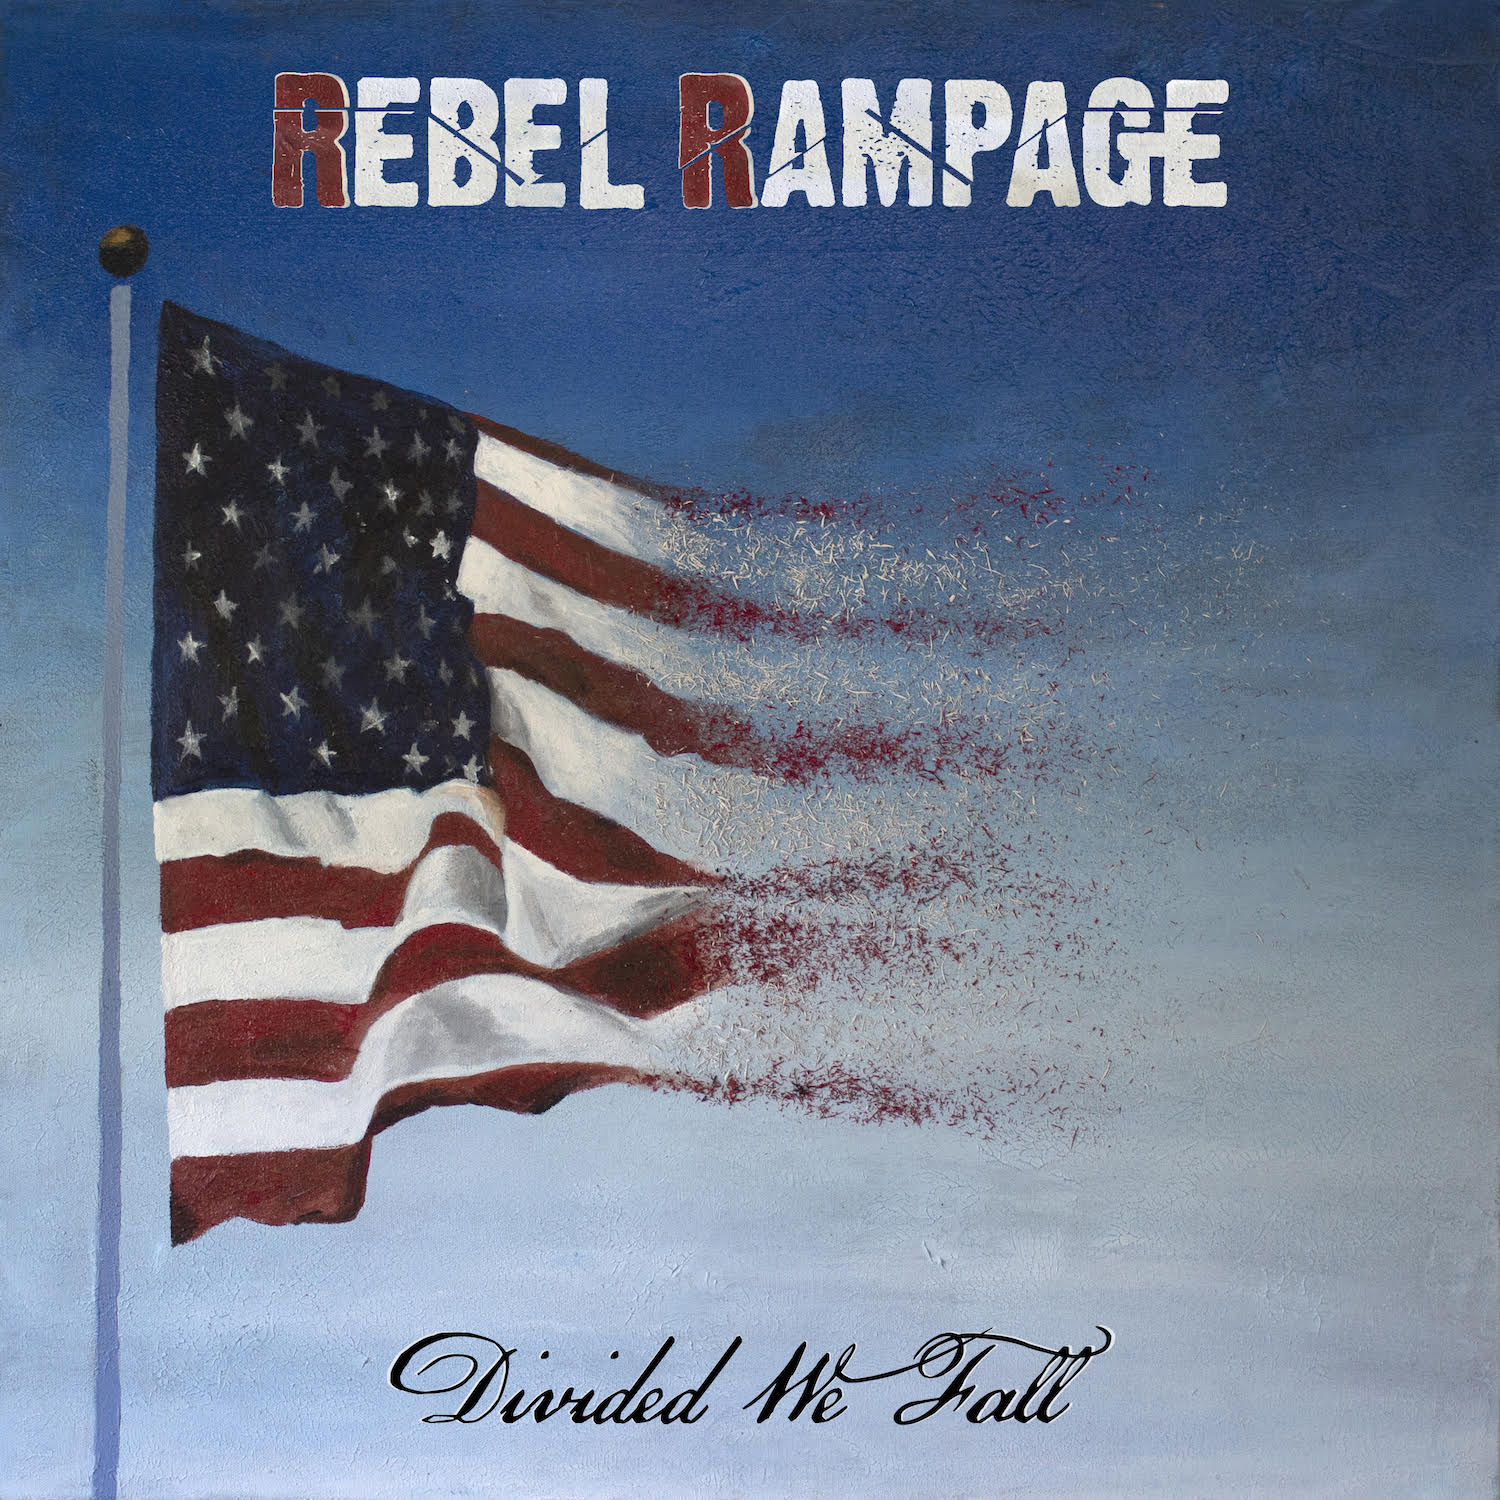 Political Rock and Roll:  Rebel Rampage – “Immigration Man”